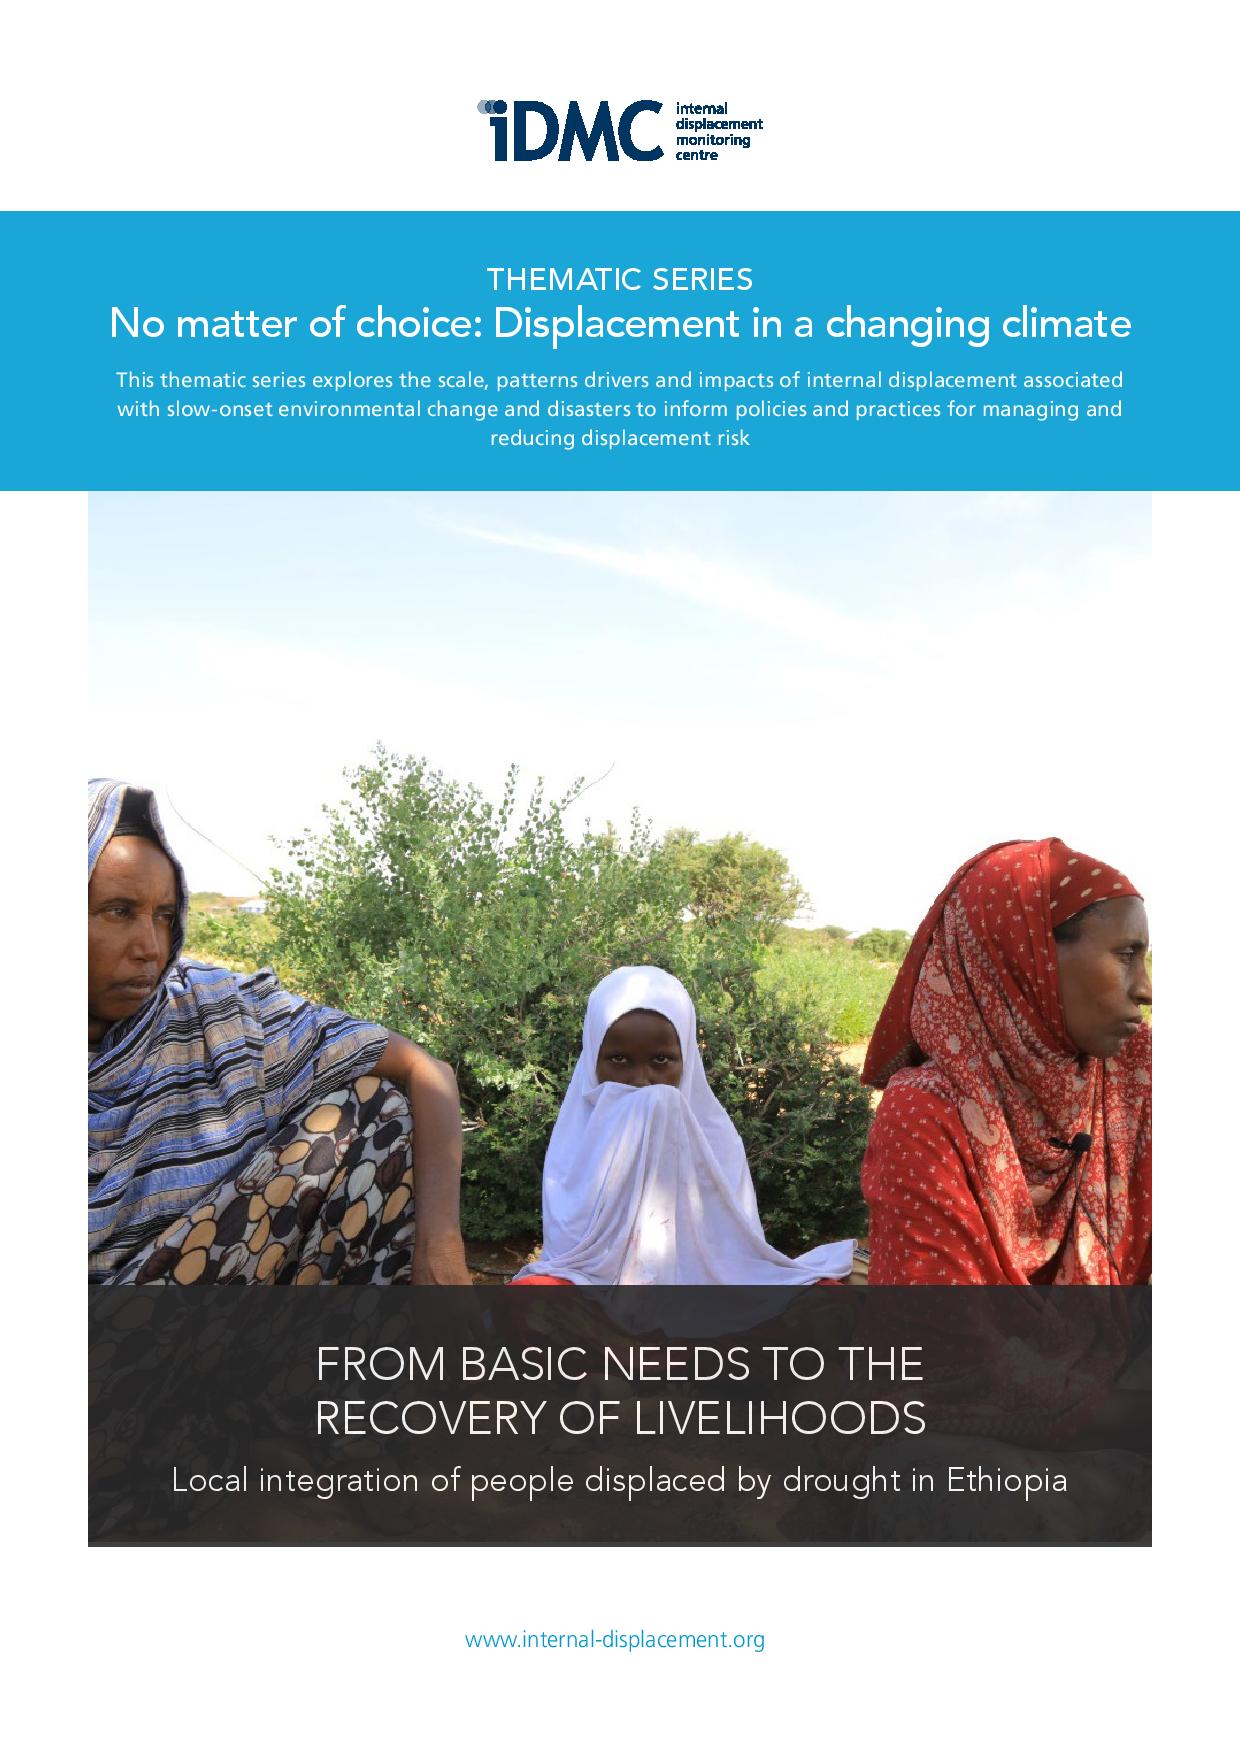 From basic needs to the recovery of livelihoods: Local integration of people displaced by drought in Ethiopia